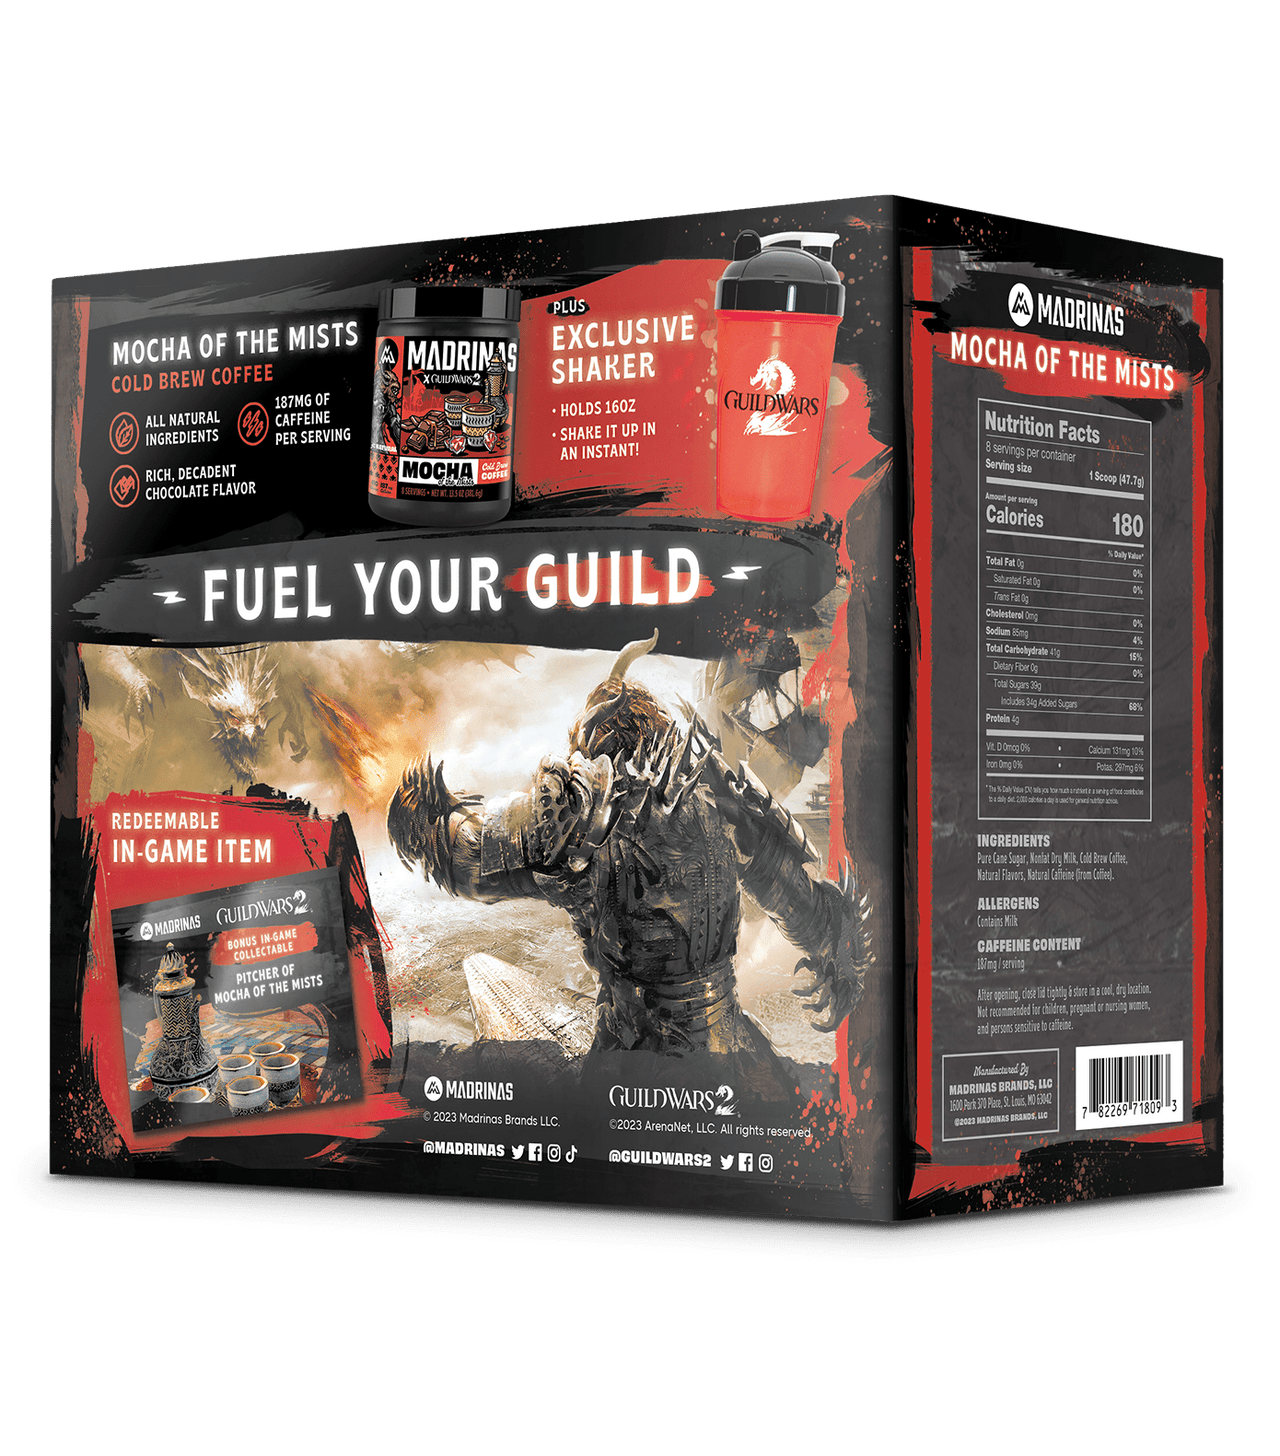 Guild Wars 2 Limited Edition